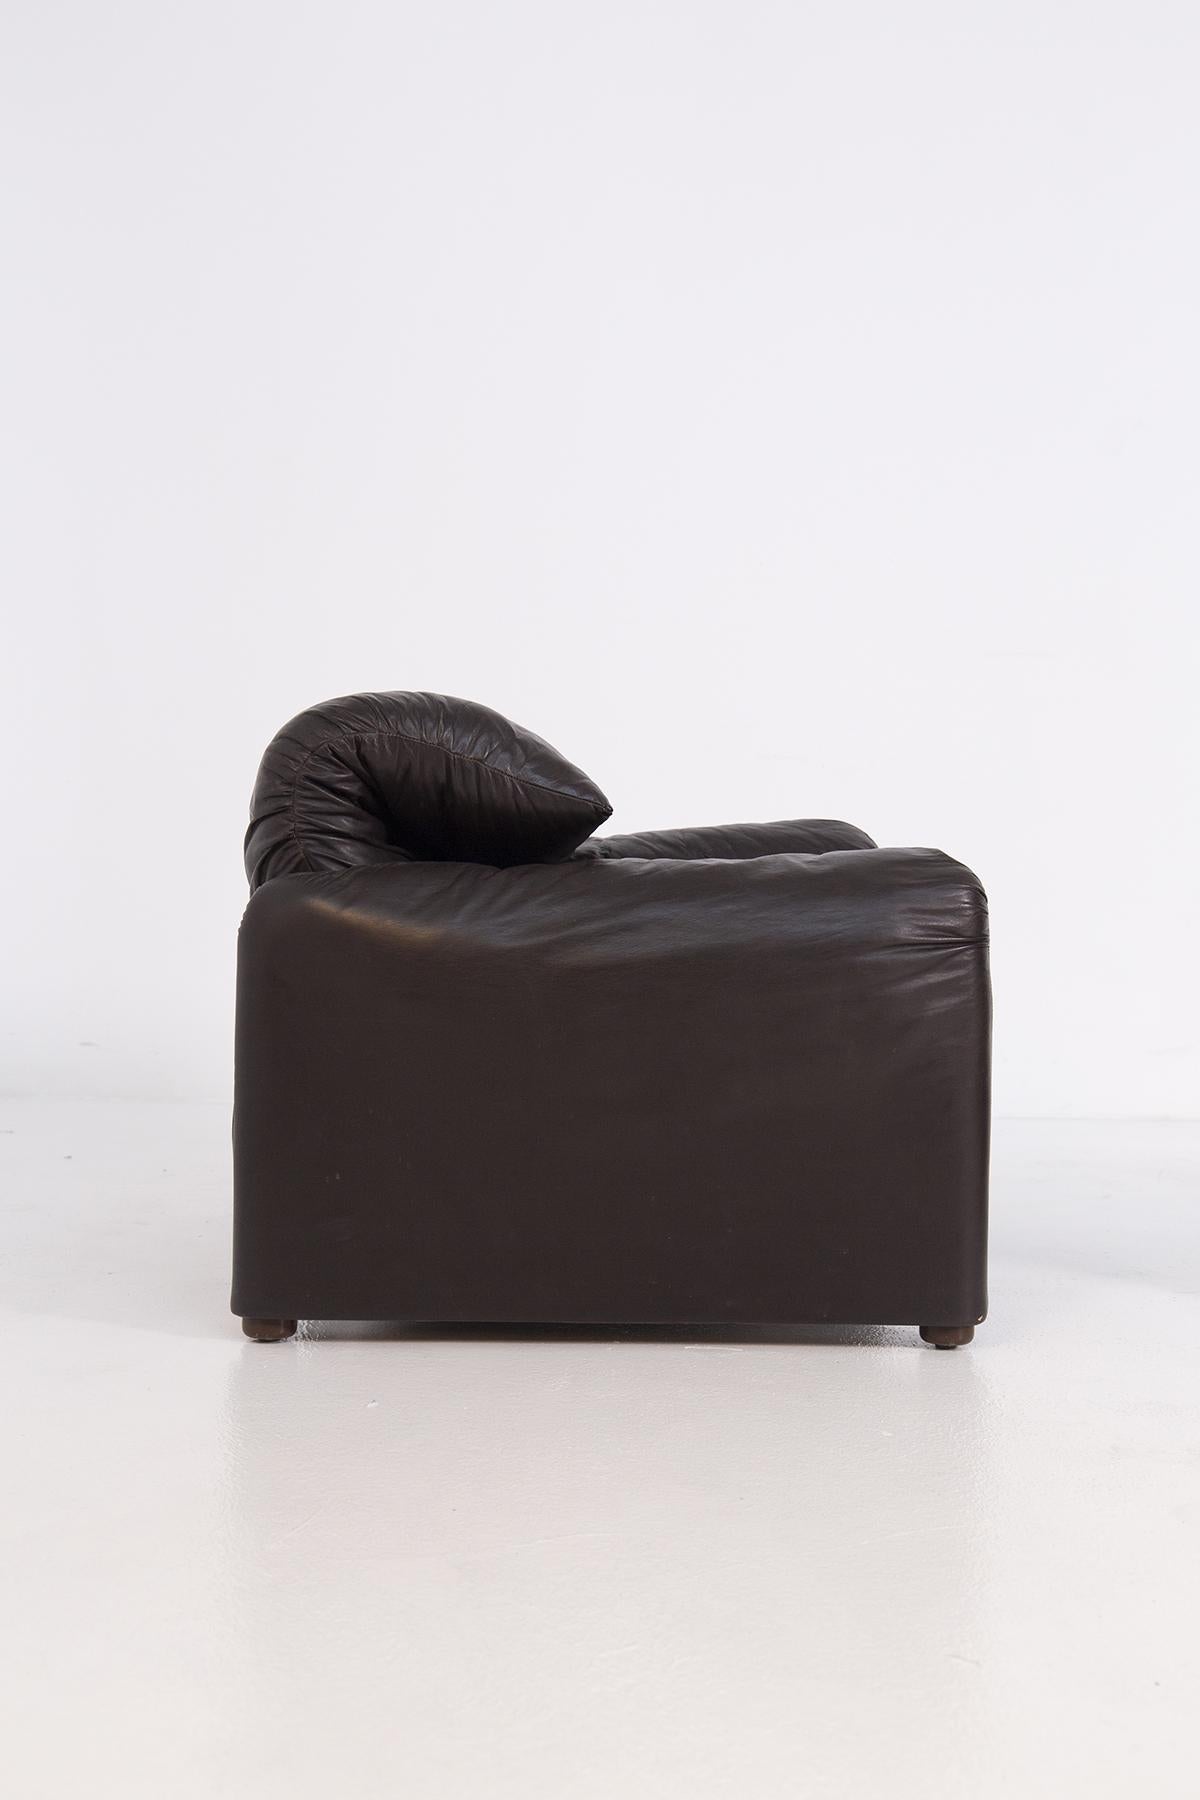 Vico Magistretti Armchair and Ottoman in Leather for Cassina, First Edition 8